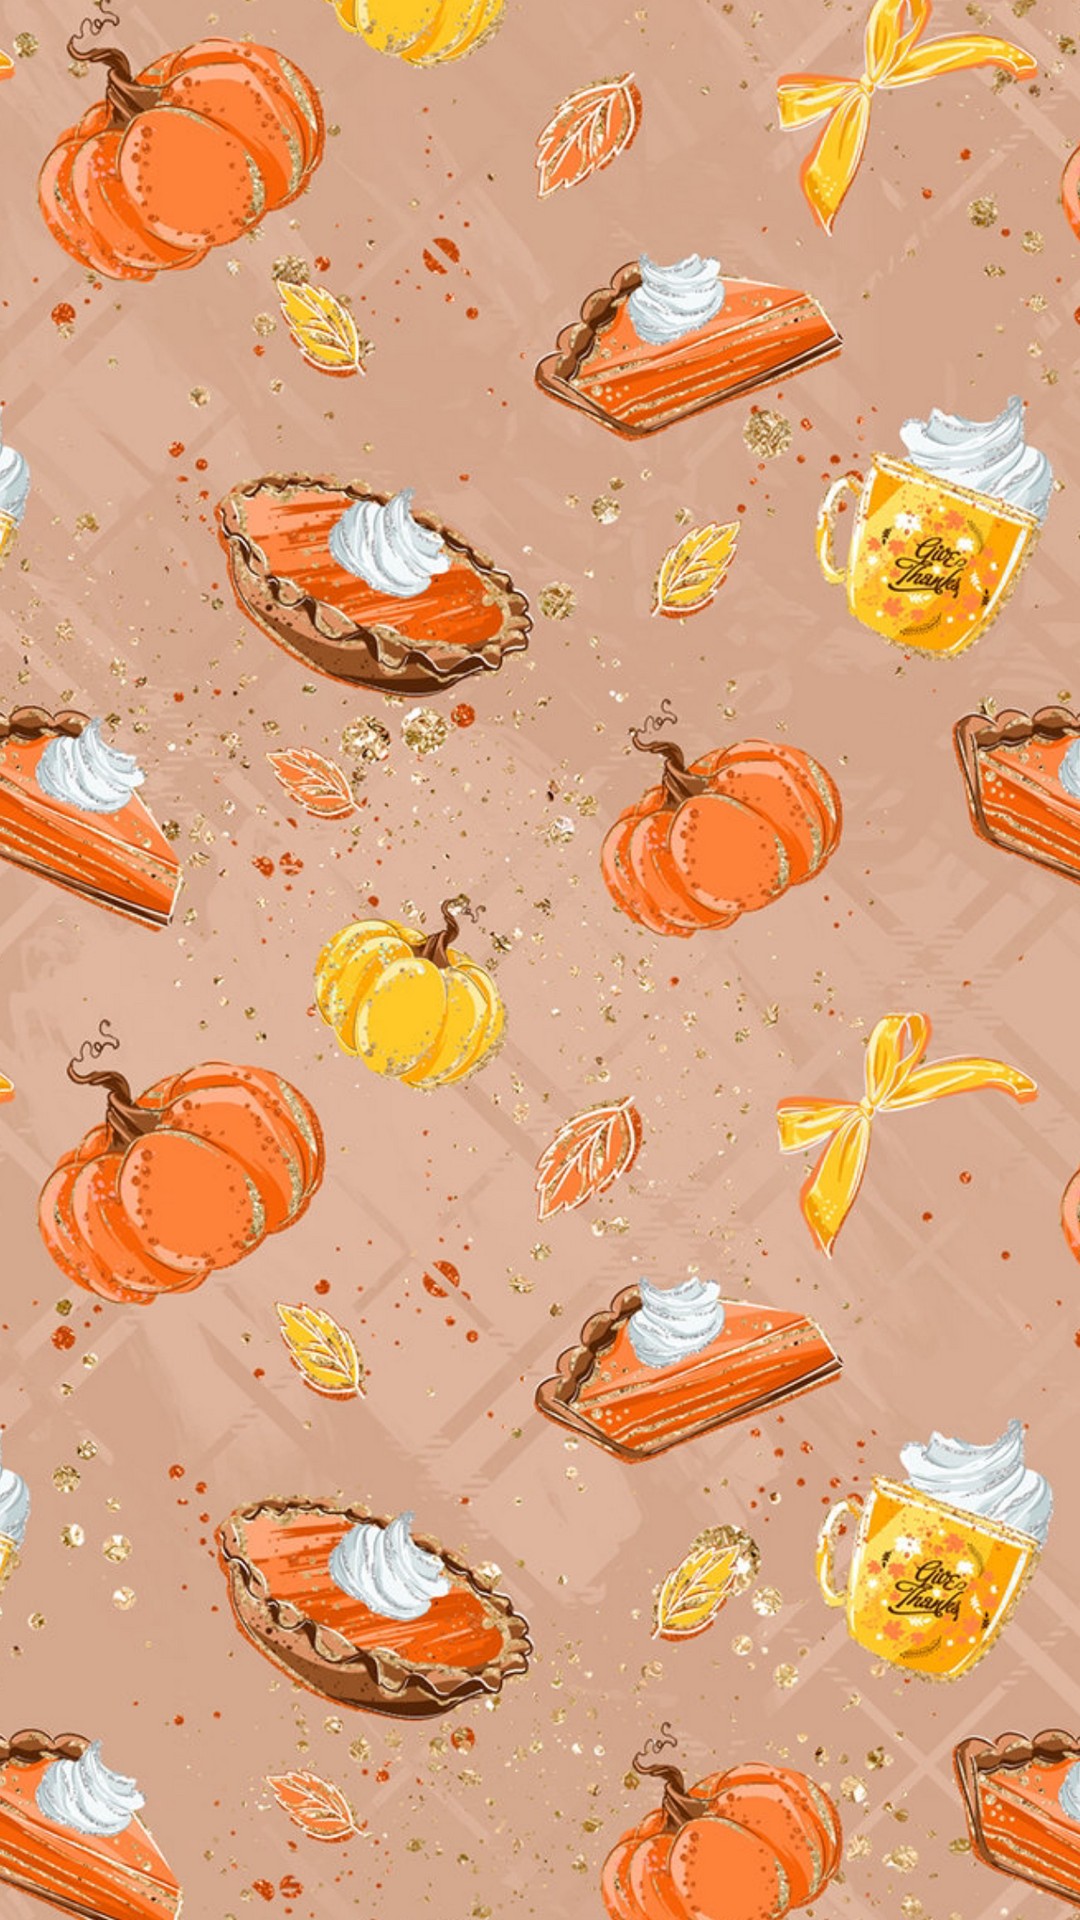 Cute Fall Phone 8 Wallpaper with high-resolution 1080x1920 pixel. Download all Mobile Wallpapers and Use them as wallpapers for your iPhone, Tablet, iPad, Android and other mobile devices